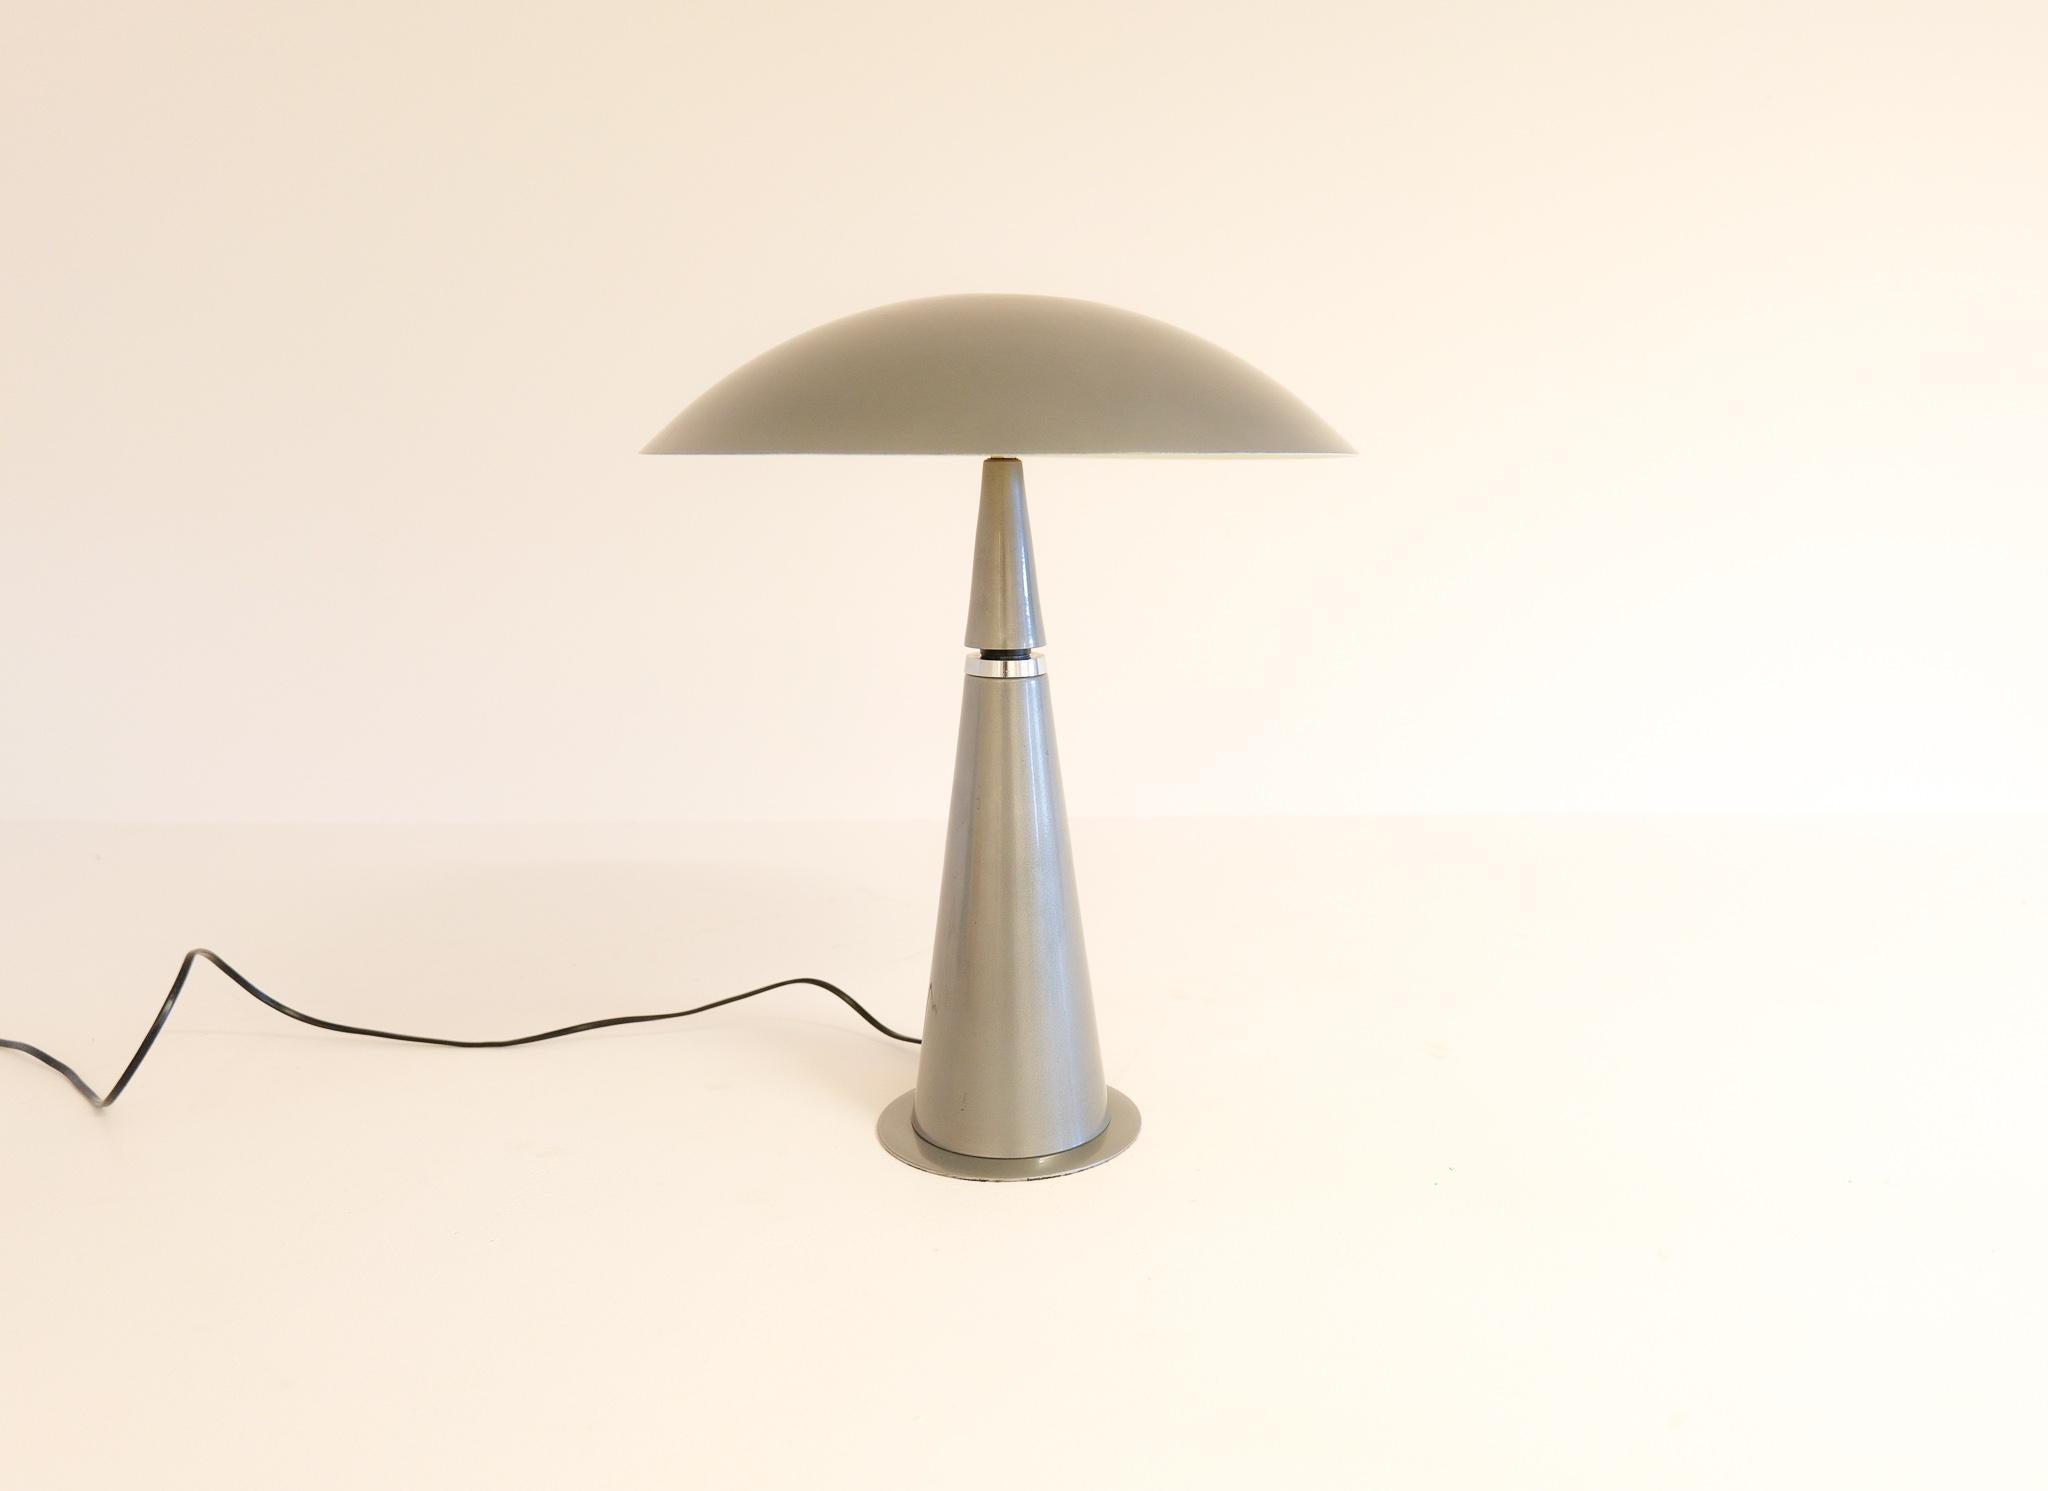 Space Age Table Lamp Aluminor France 1990s In Good Condition For Sale In Hillringsberg, SE